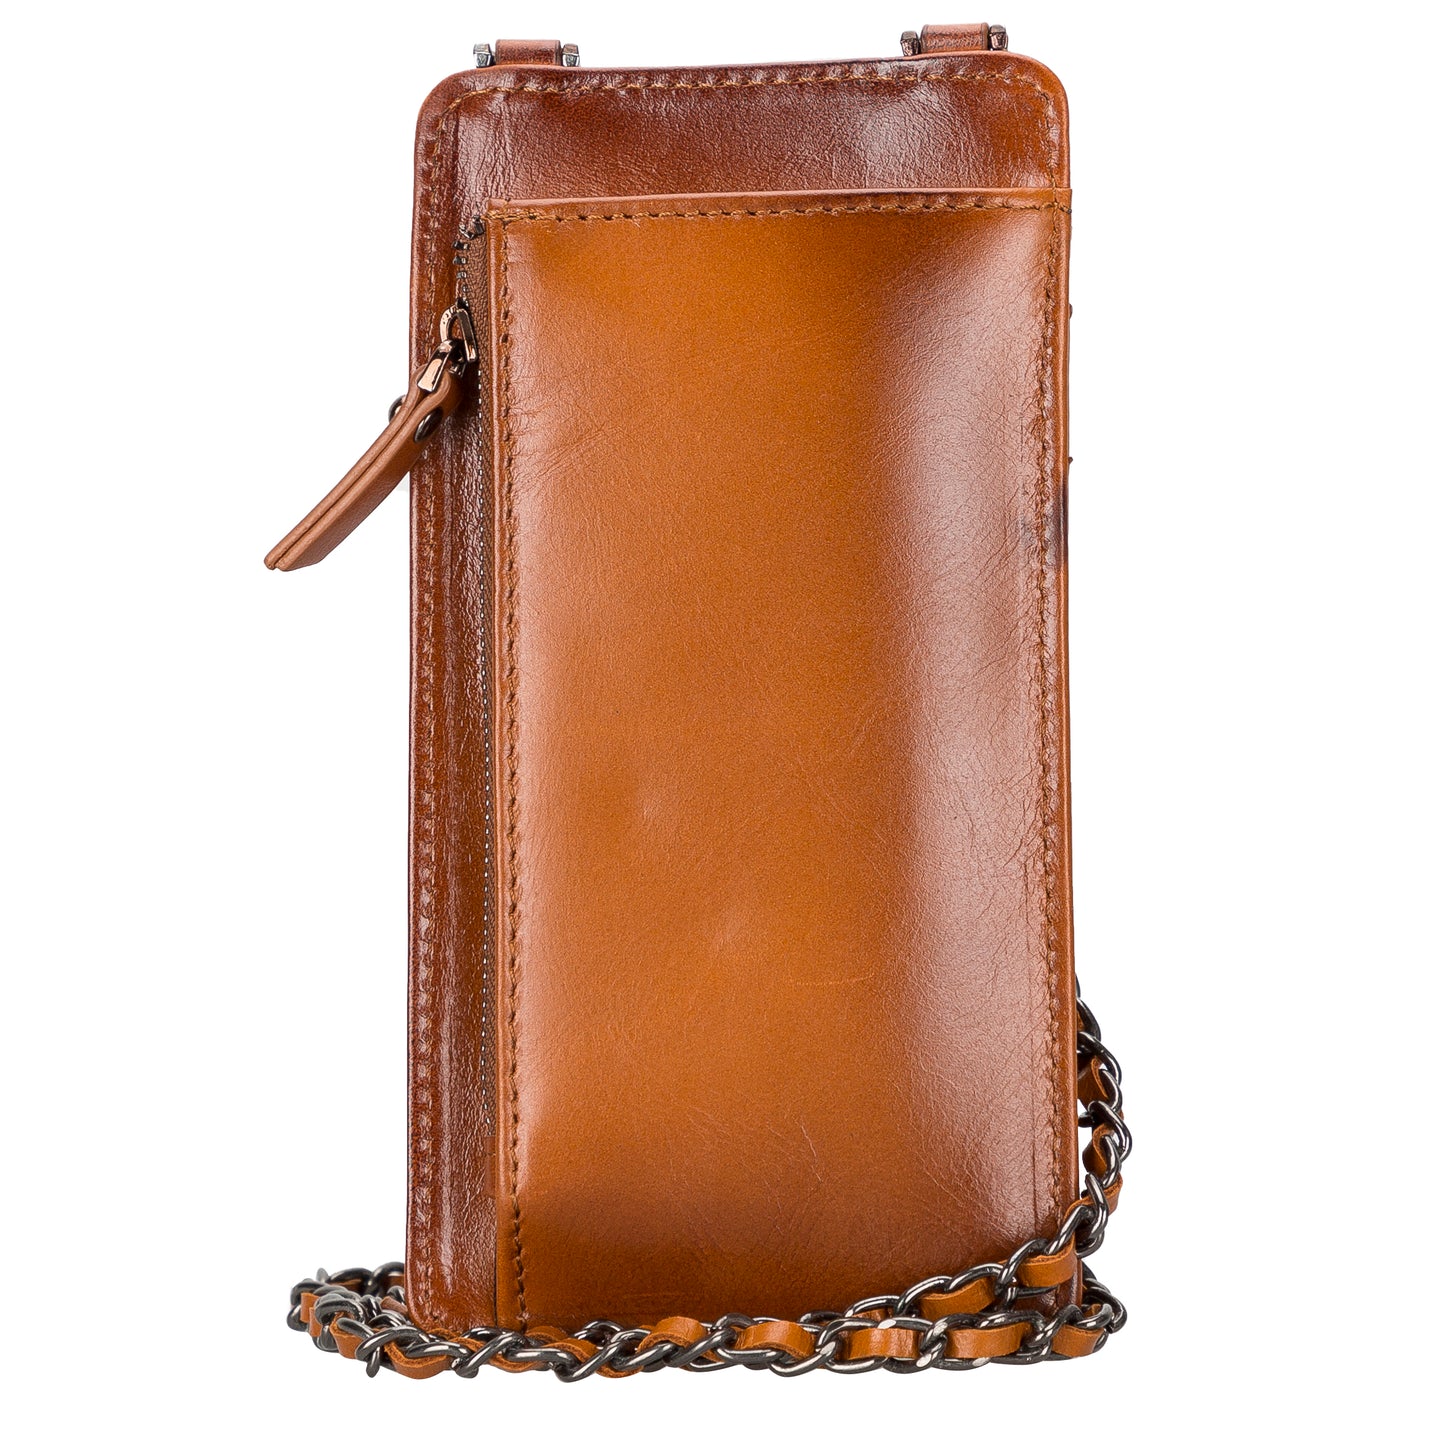 Awjin Leather Phone Bag Up to 6.7" - Rustic Brown